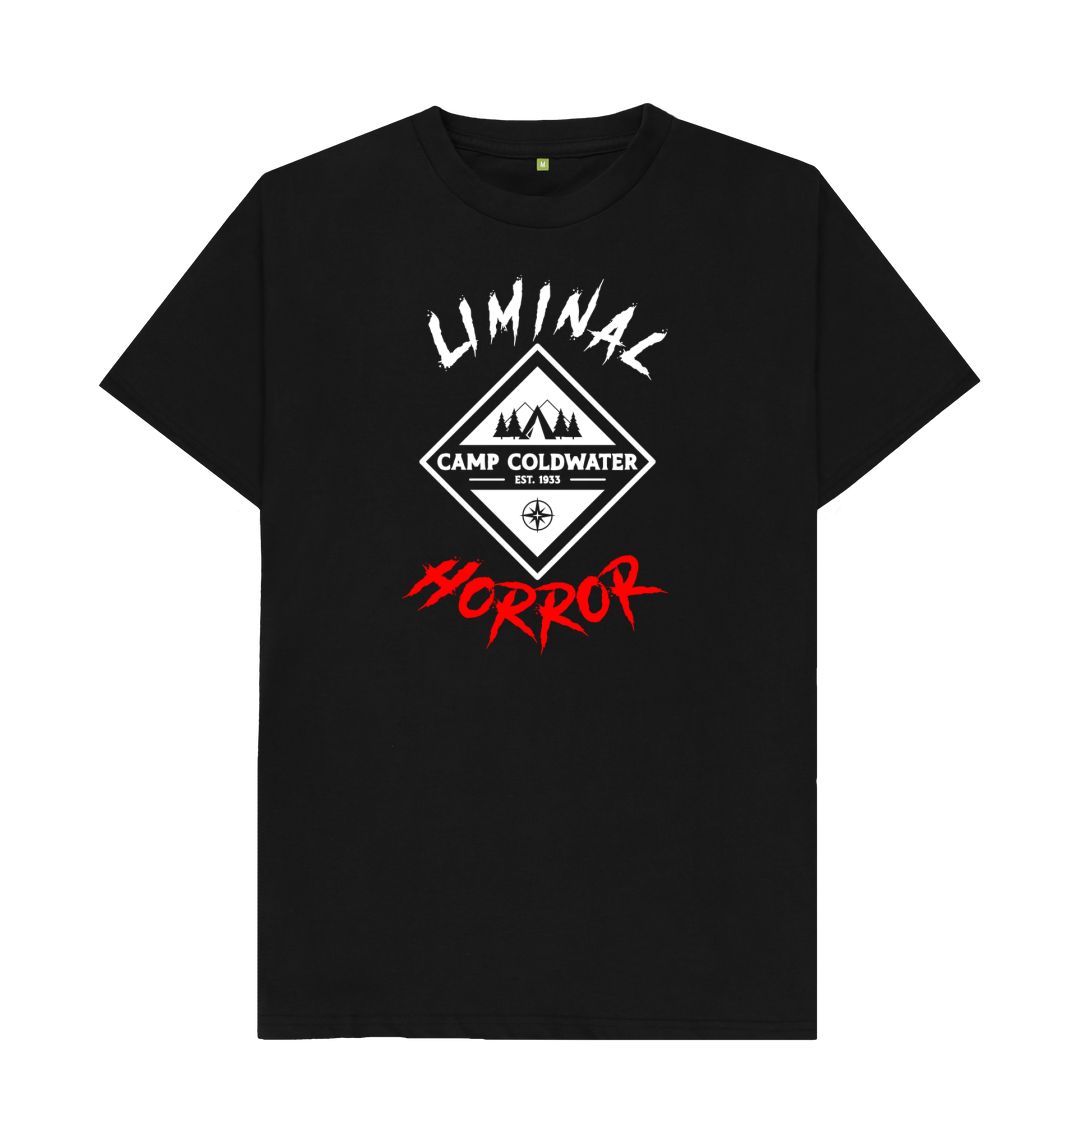 Black Camp Coldwater White and Red Logo on Dark Shirt